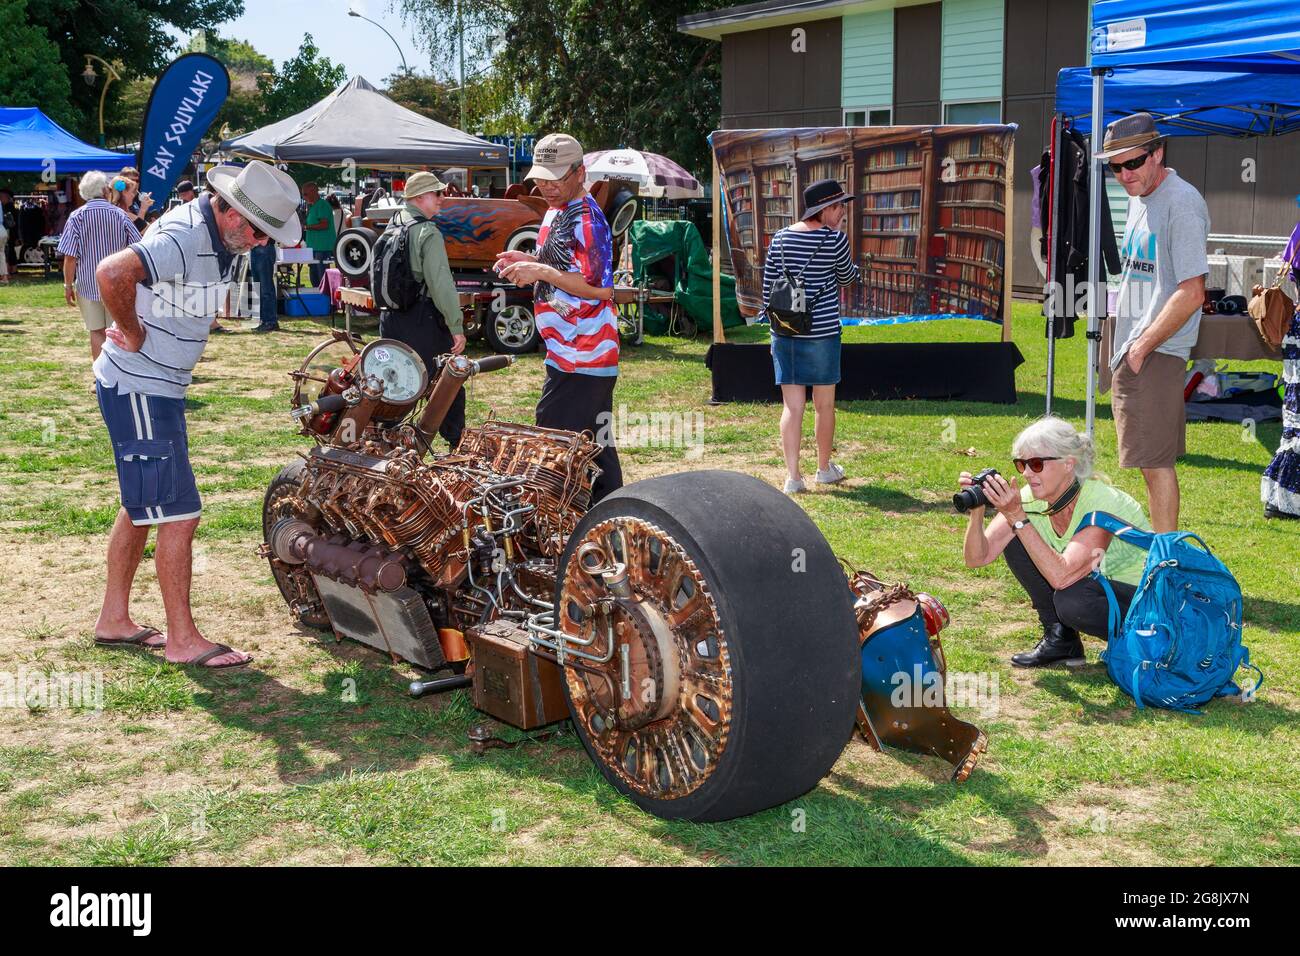 A steampunk-inspired motorcycle on display at a retro fair in Tauranga, New Zealand Stock Photo